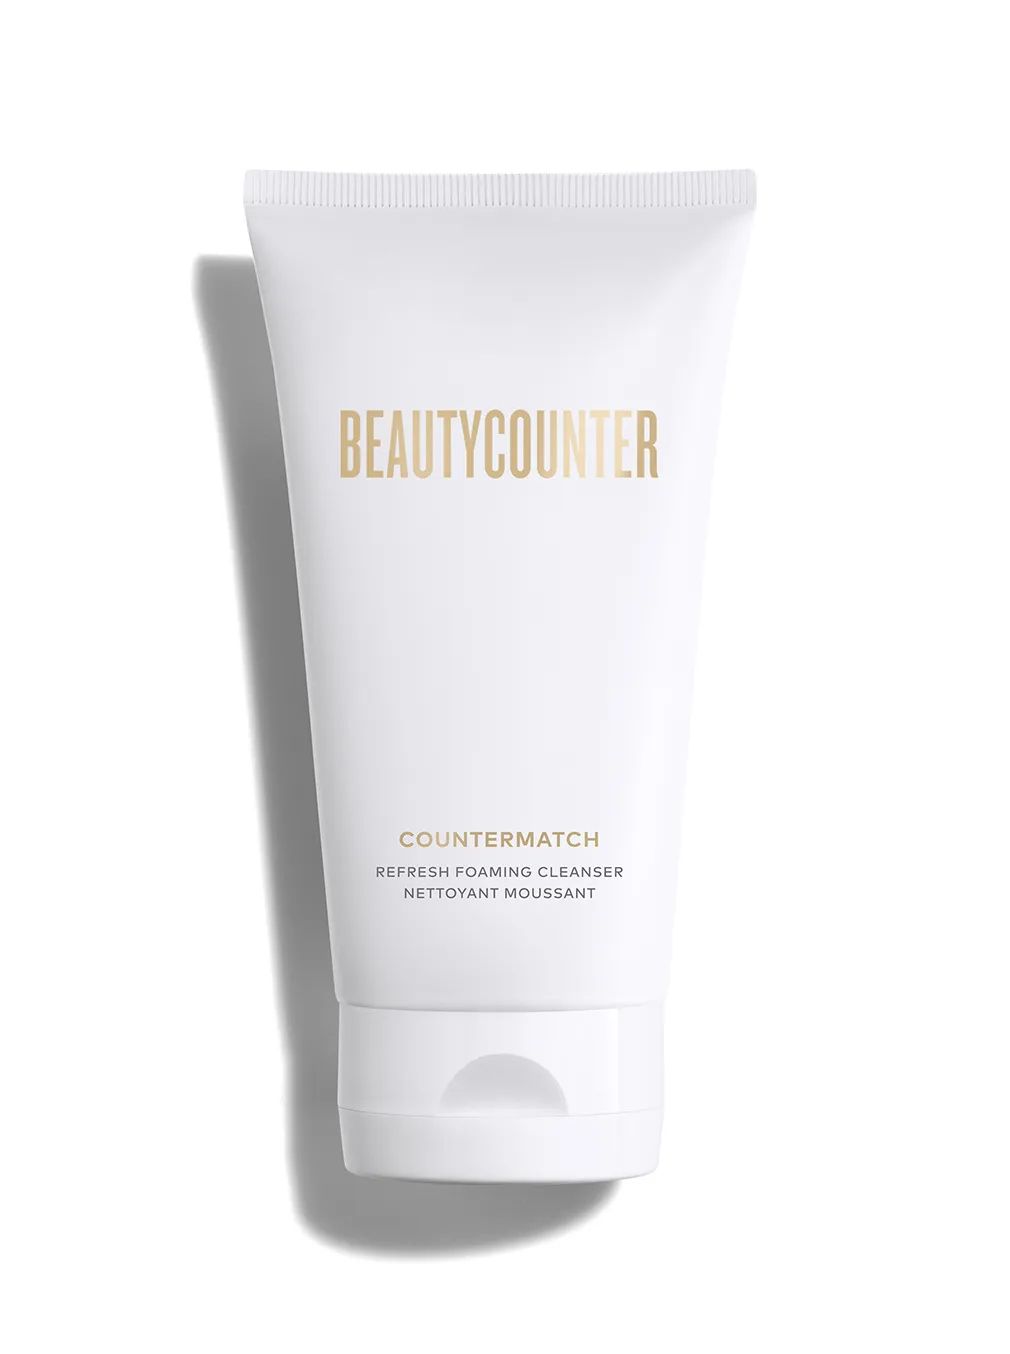 Countermatch Refresh Foaming Cleanser- Face Wash - Beautycounter - Skin Care, Makeup, Bath and Bo... | Beautycounter.com